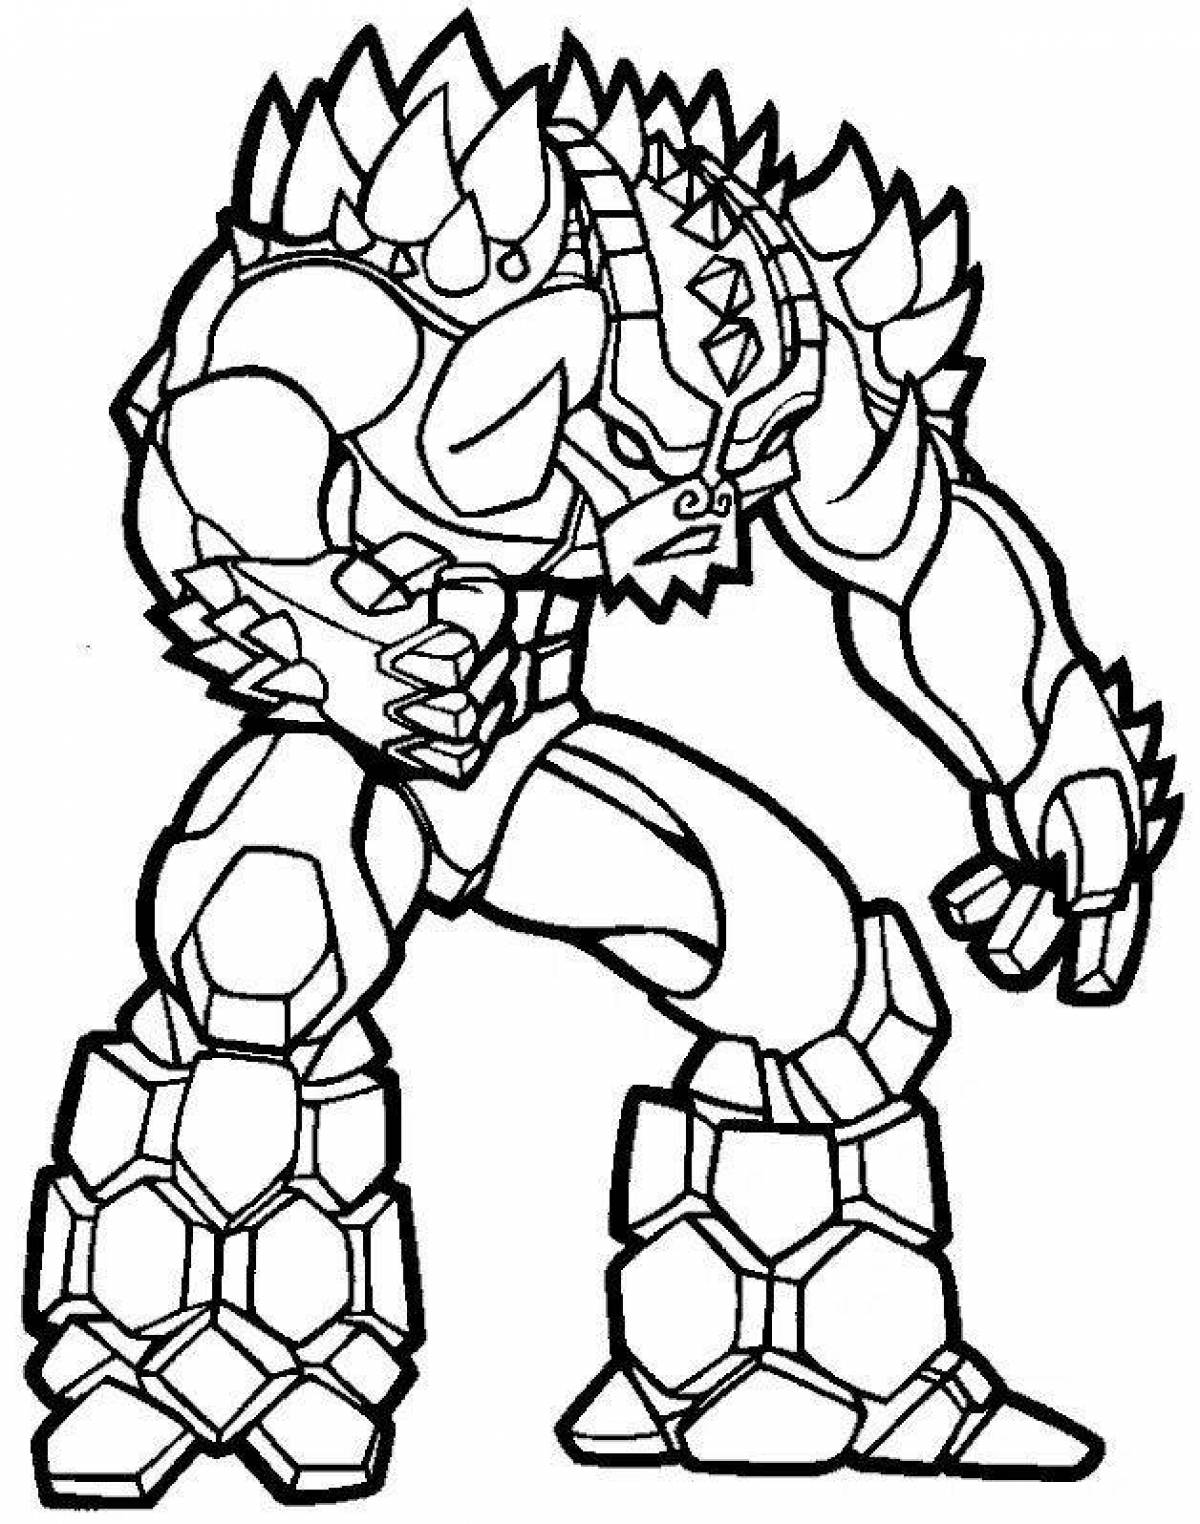 Creative monster boys coloring pages